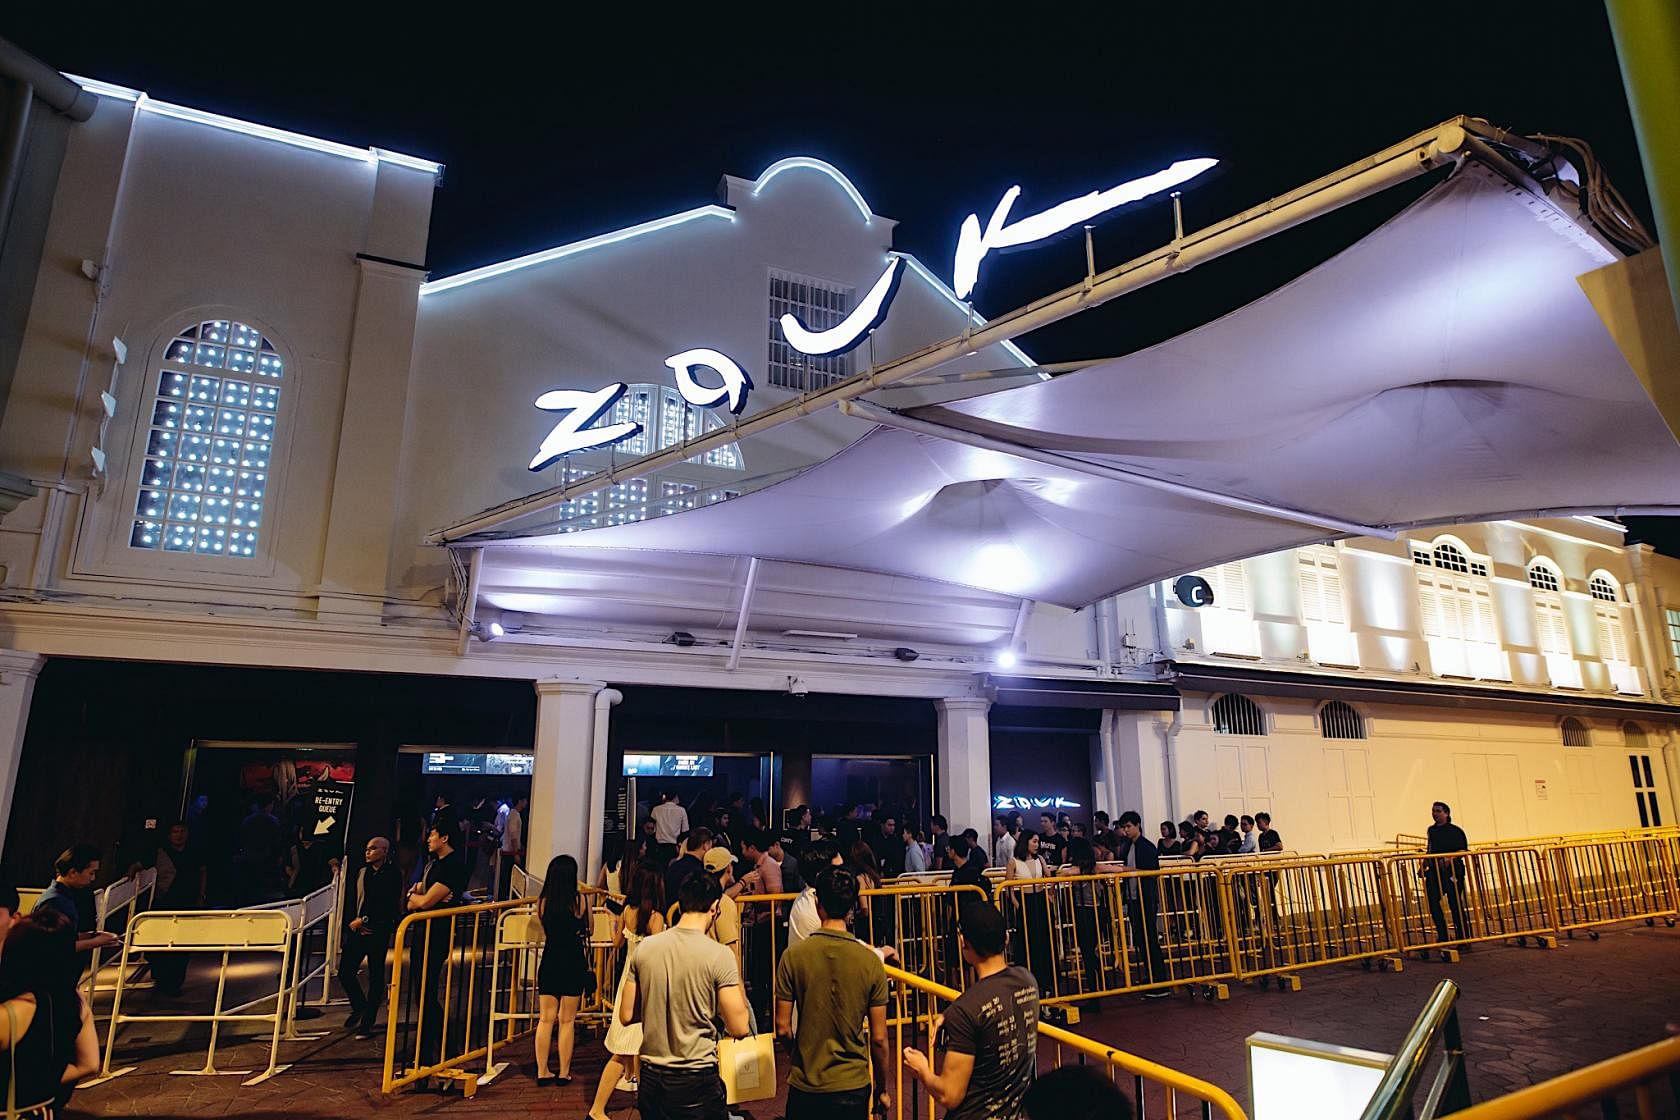 Zouk in River Valley, Singapore